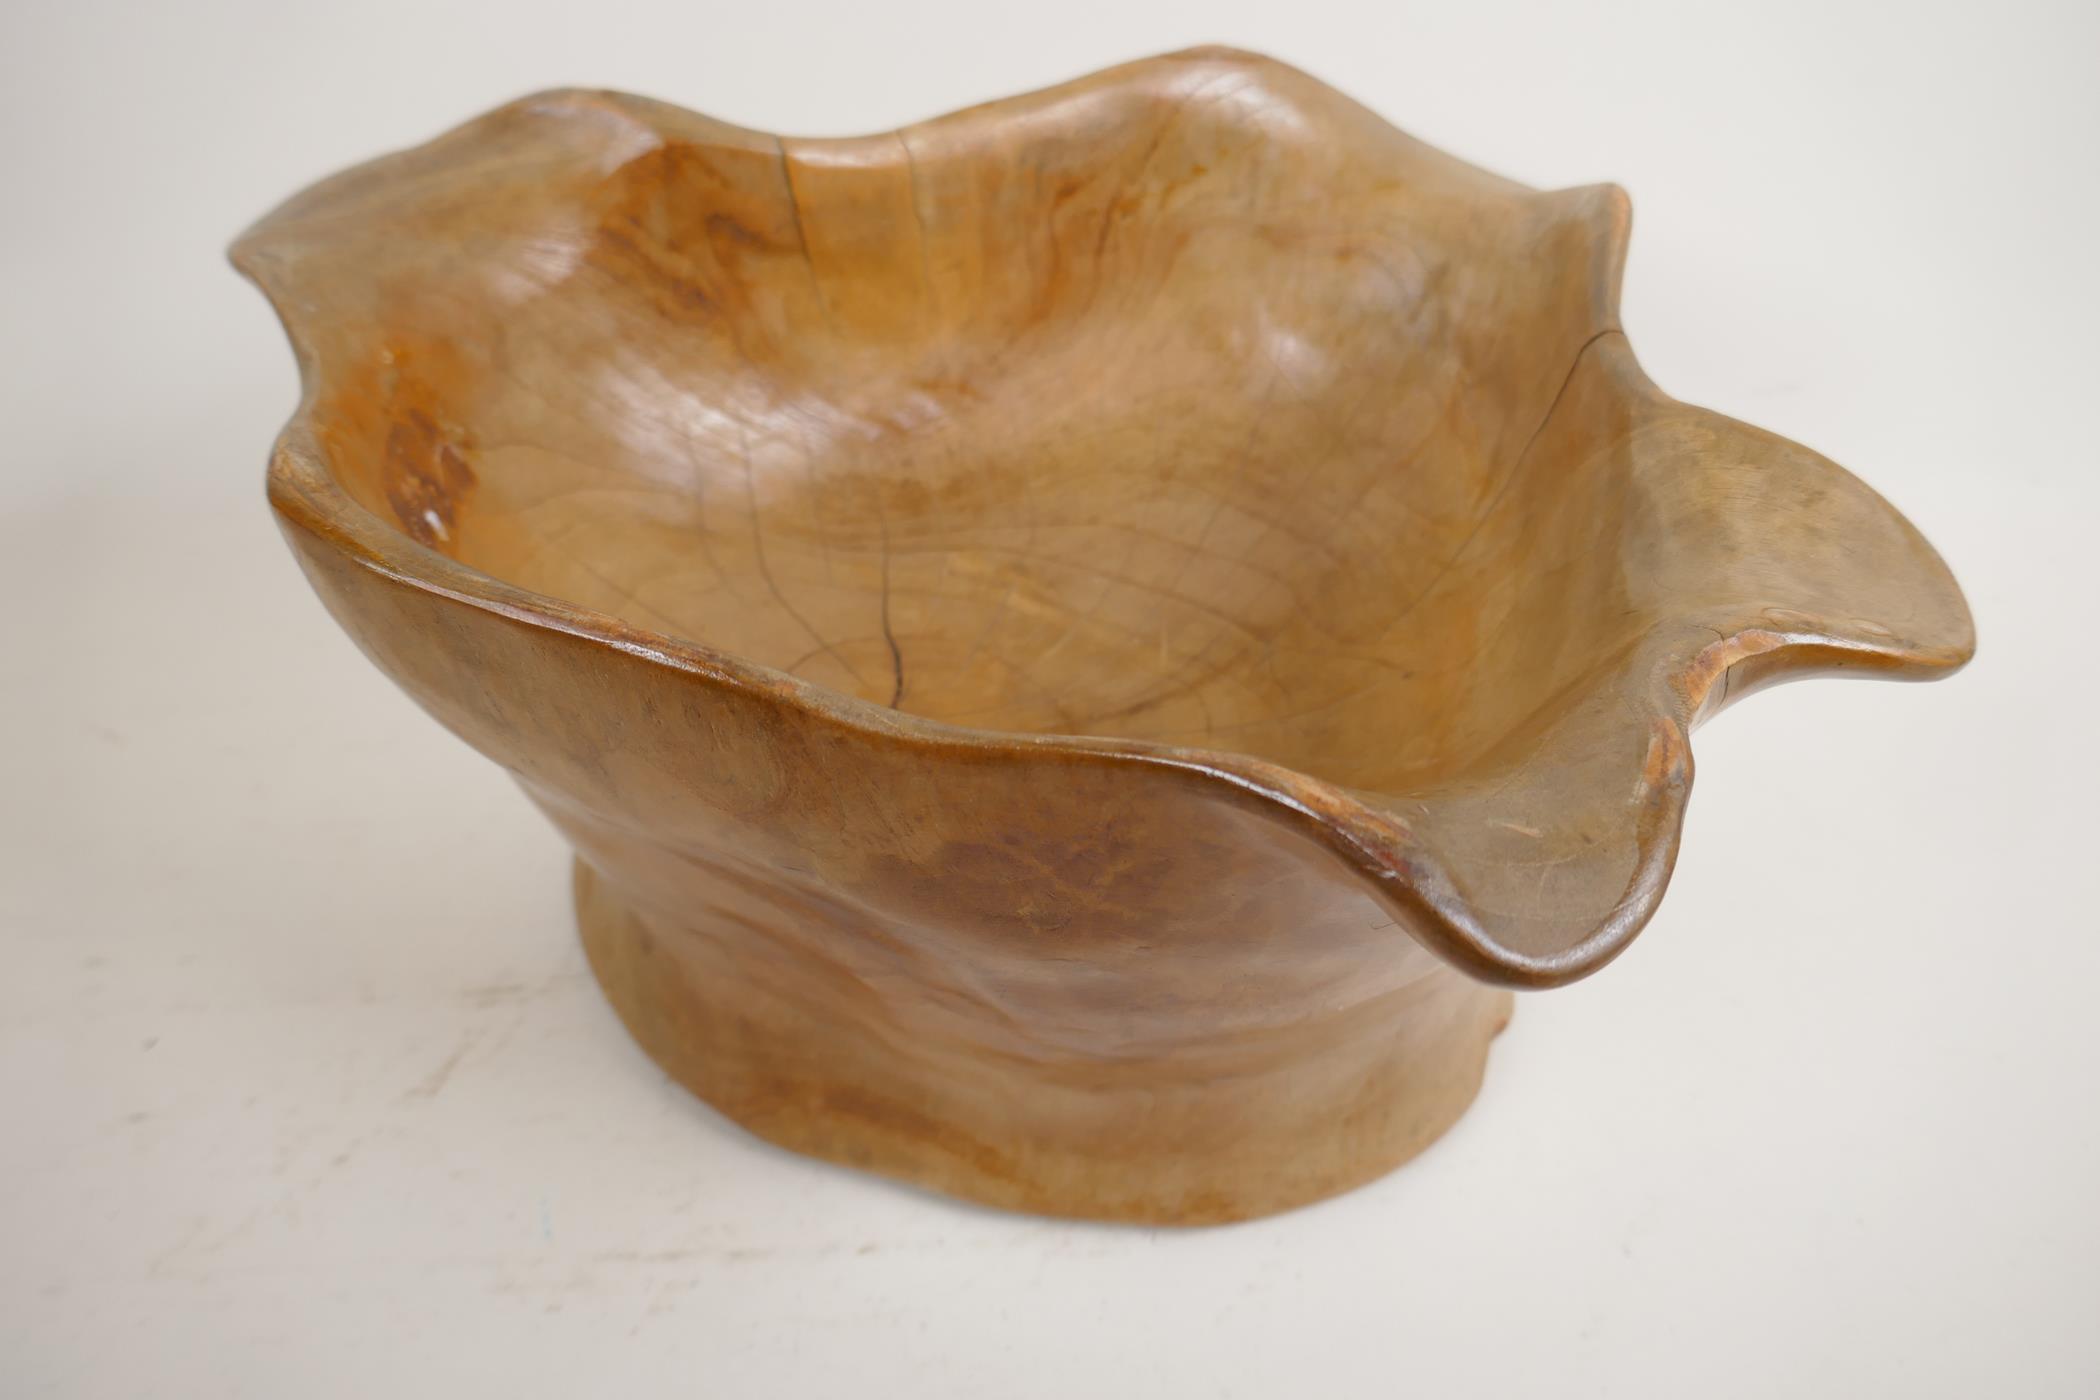 A carved root wood bowl, 7" high